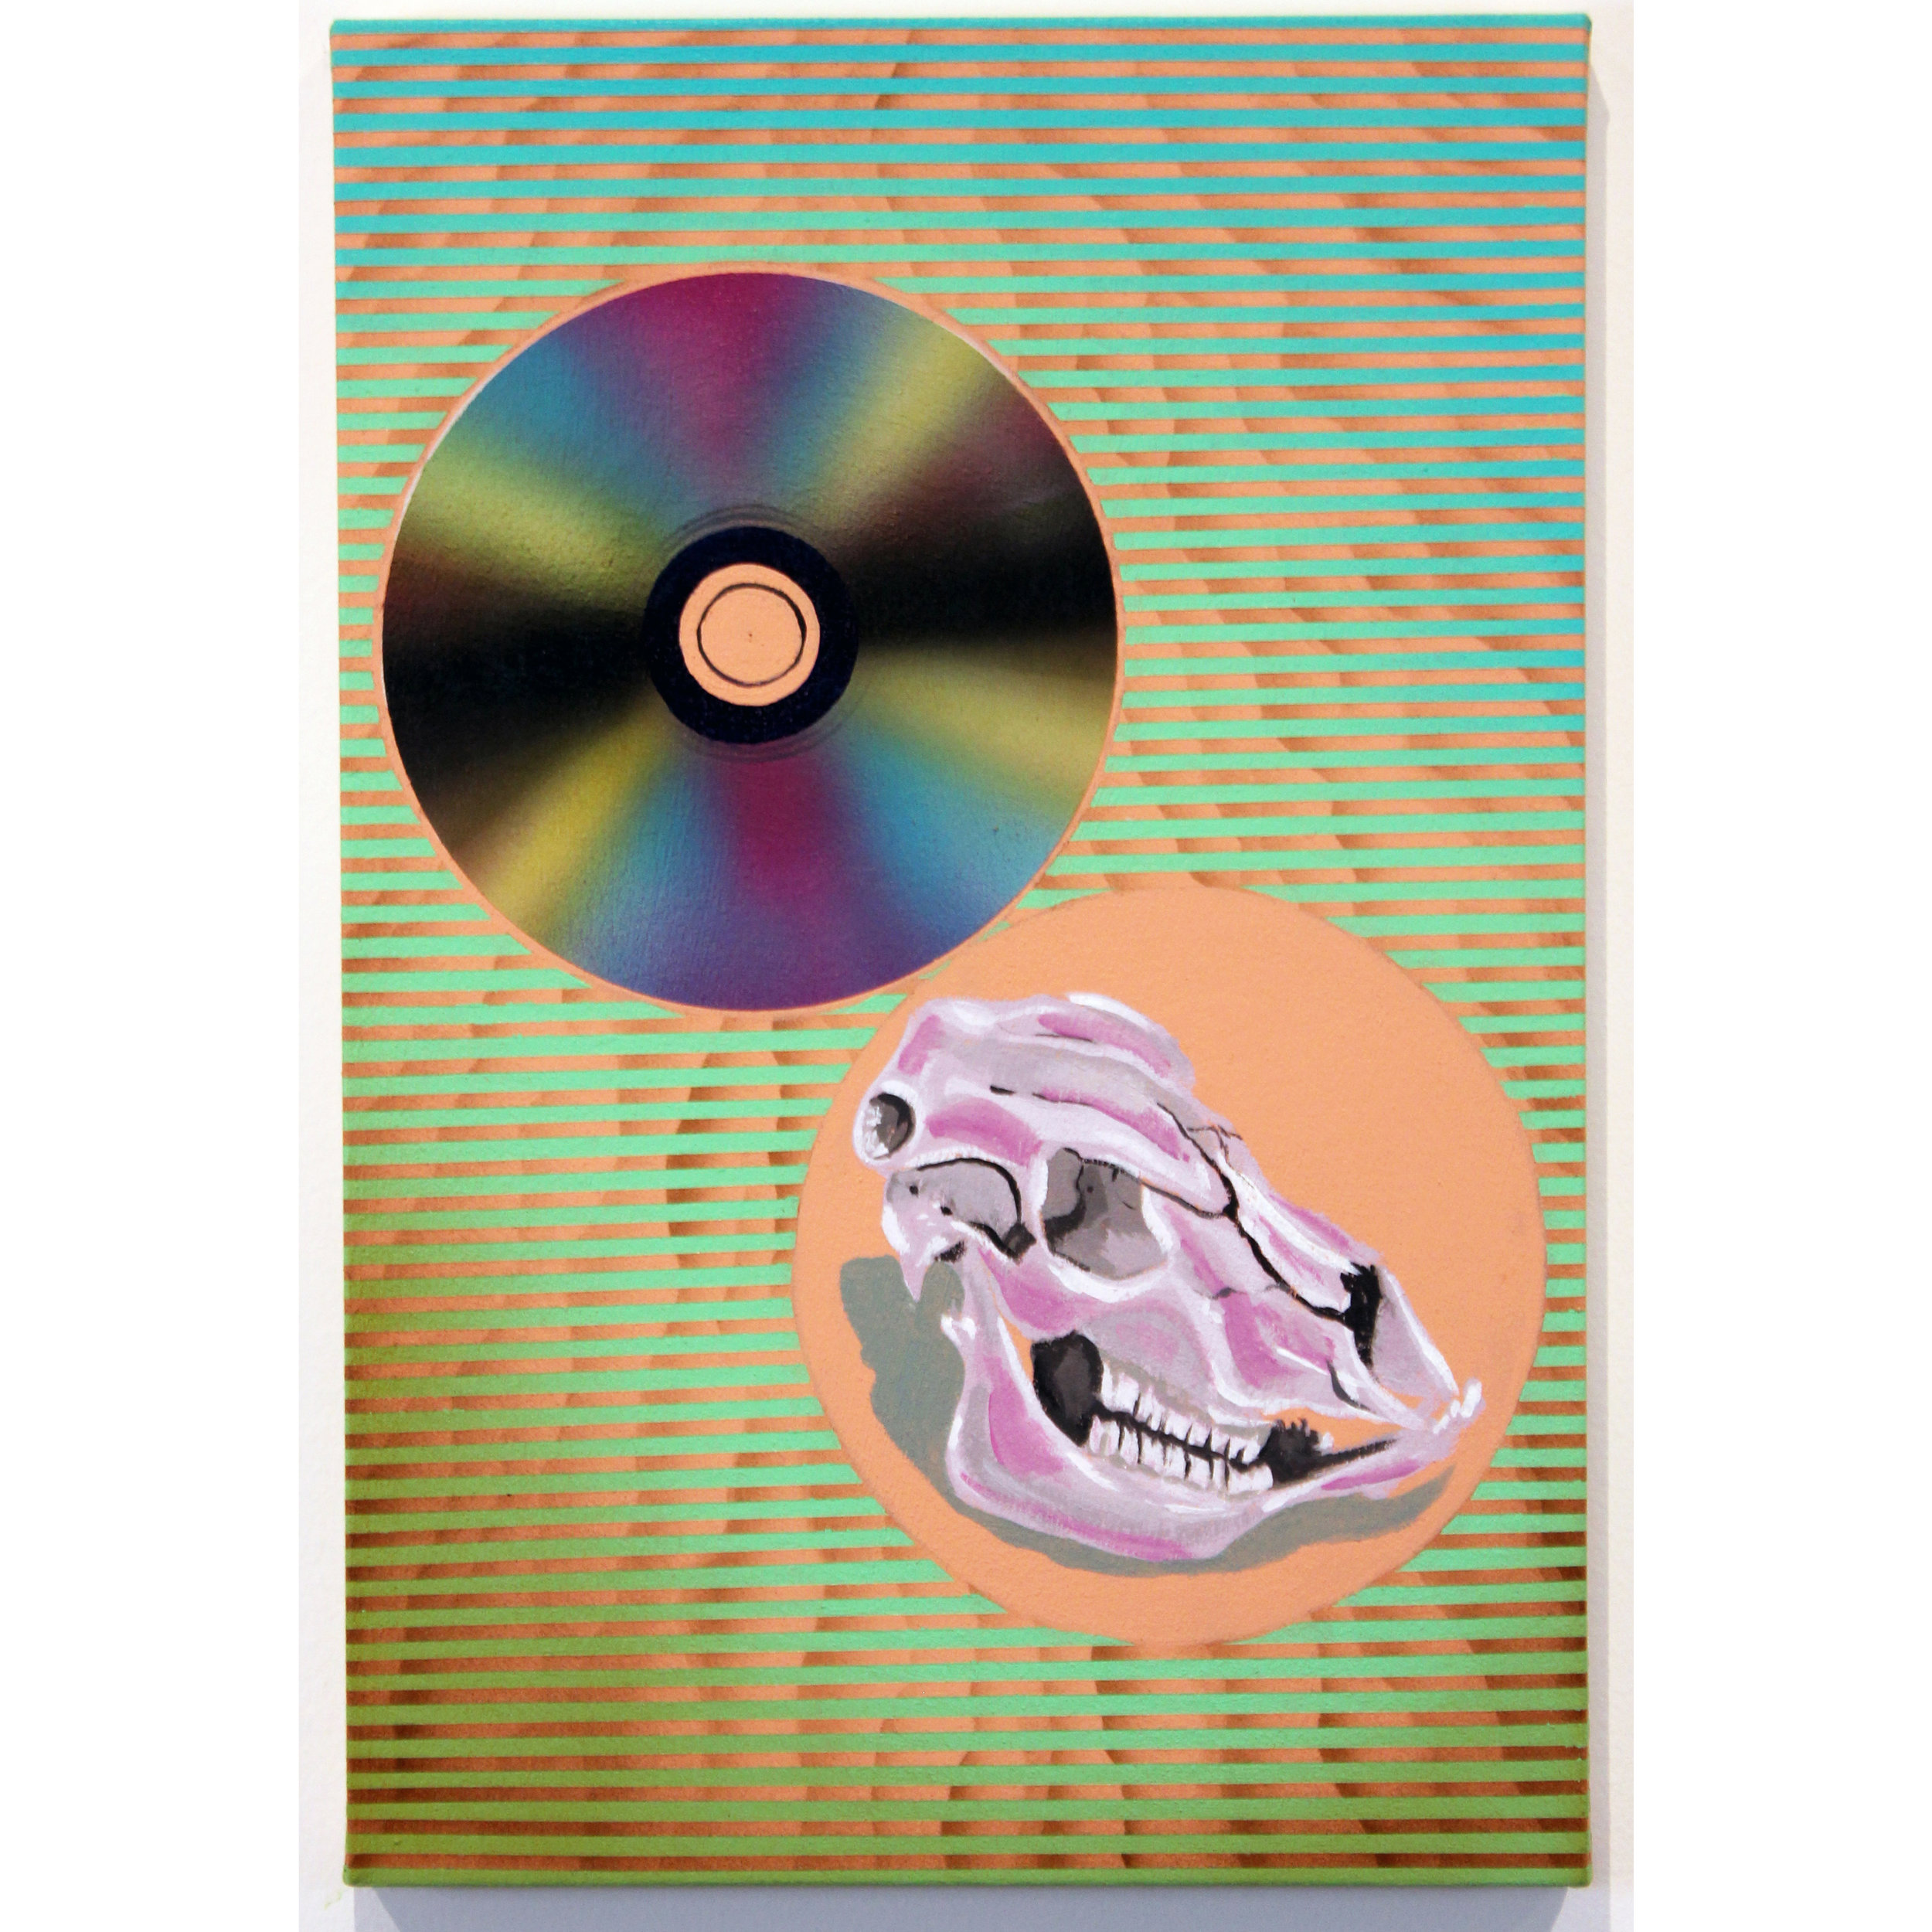   CD and Skull,  2019, acrylic on canvas, 15 x 10 inches. 